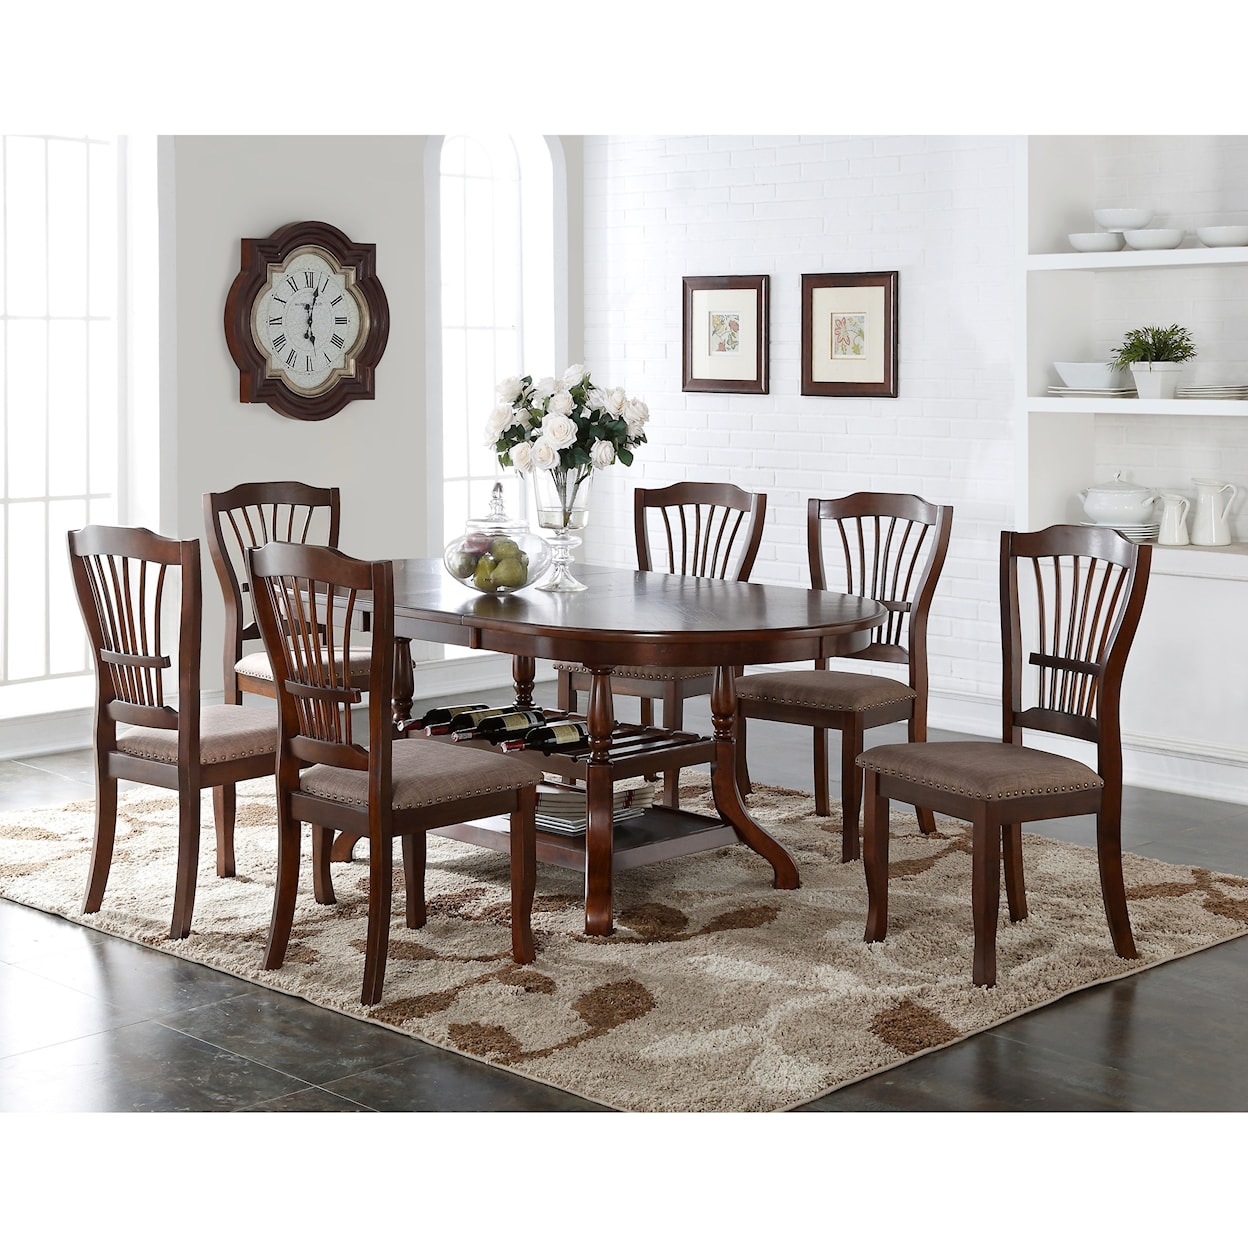 New Classic Furniture Bixby 7 Piece Dining Table Set